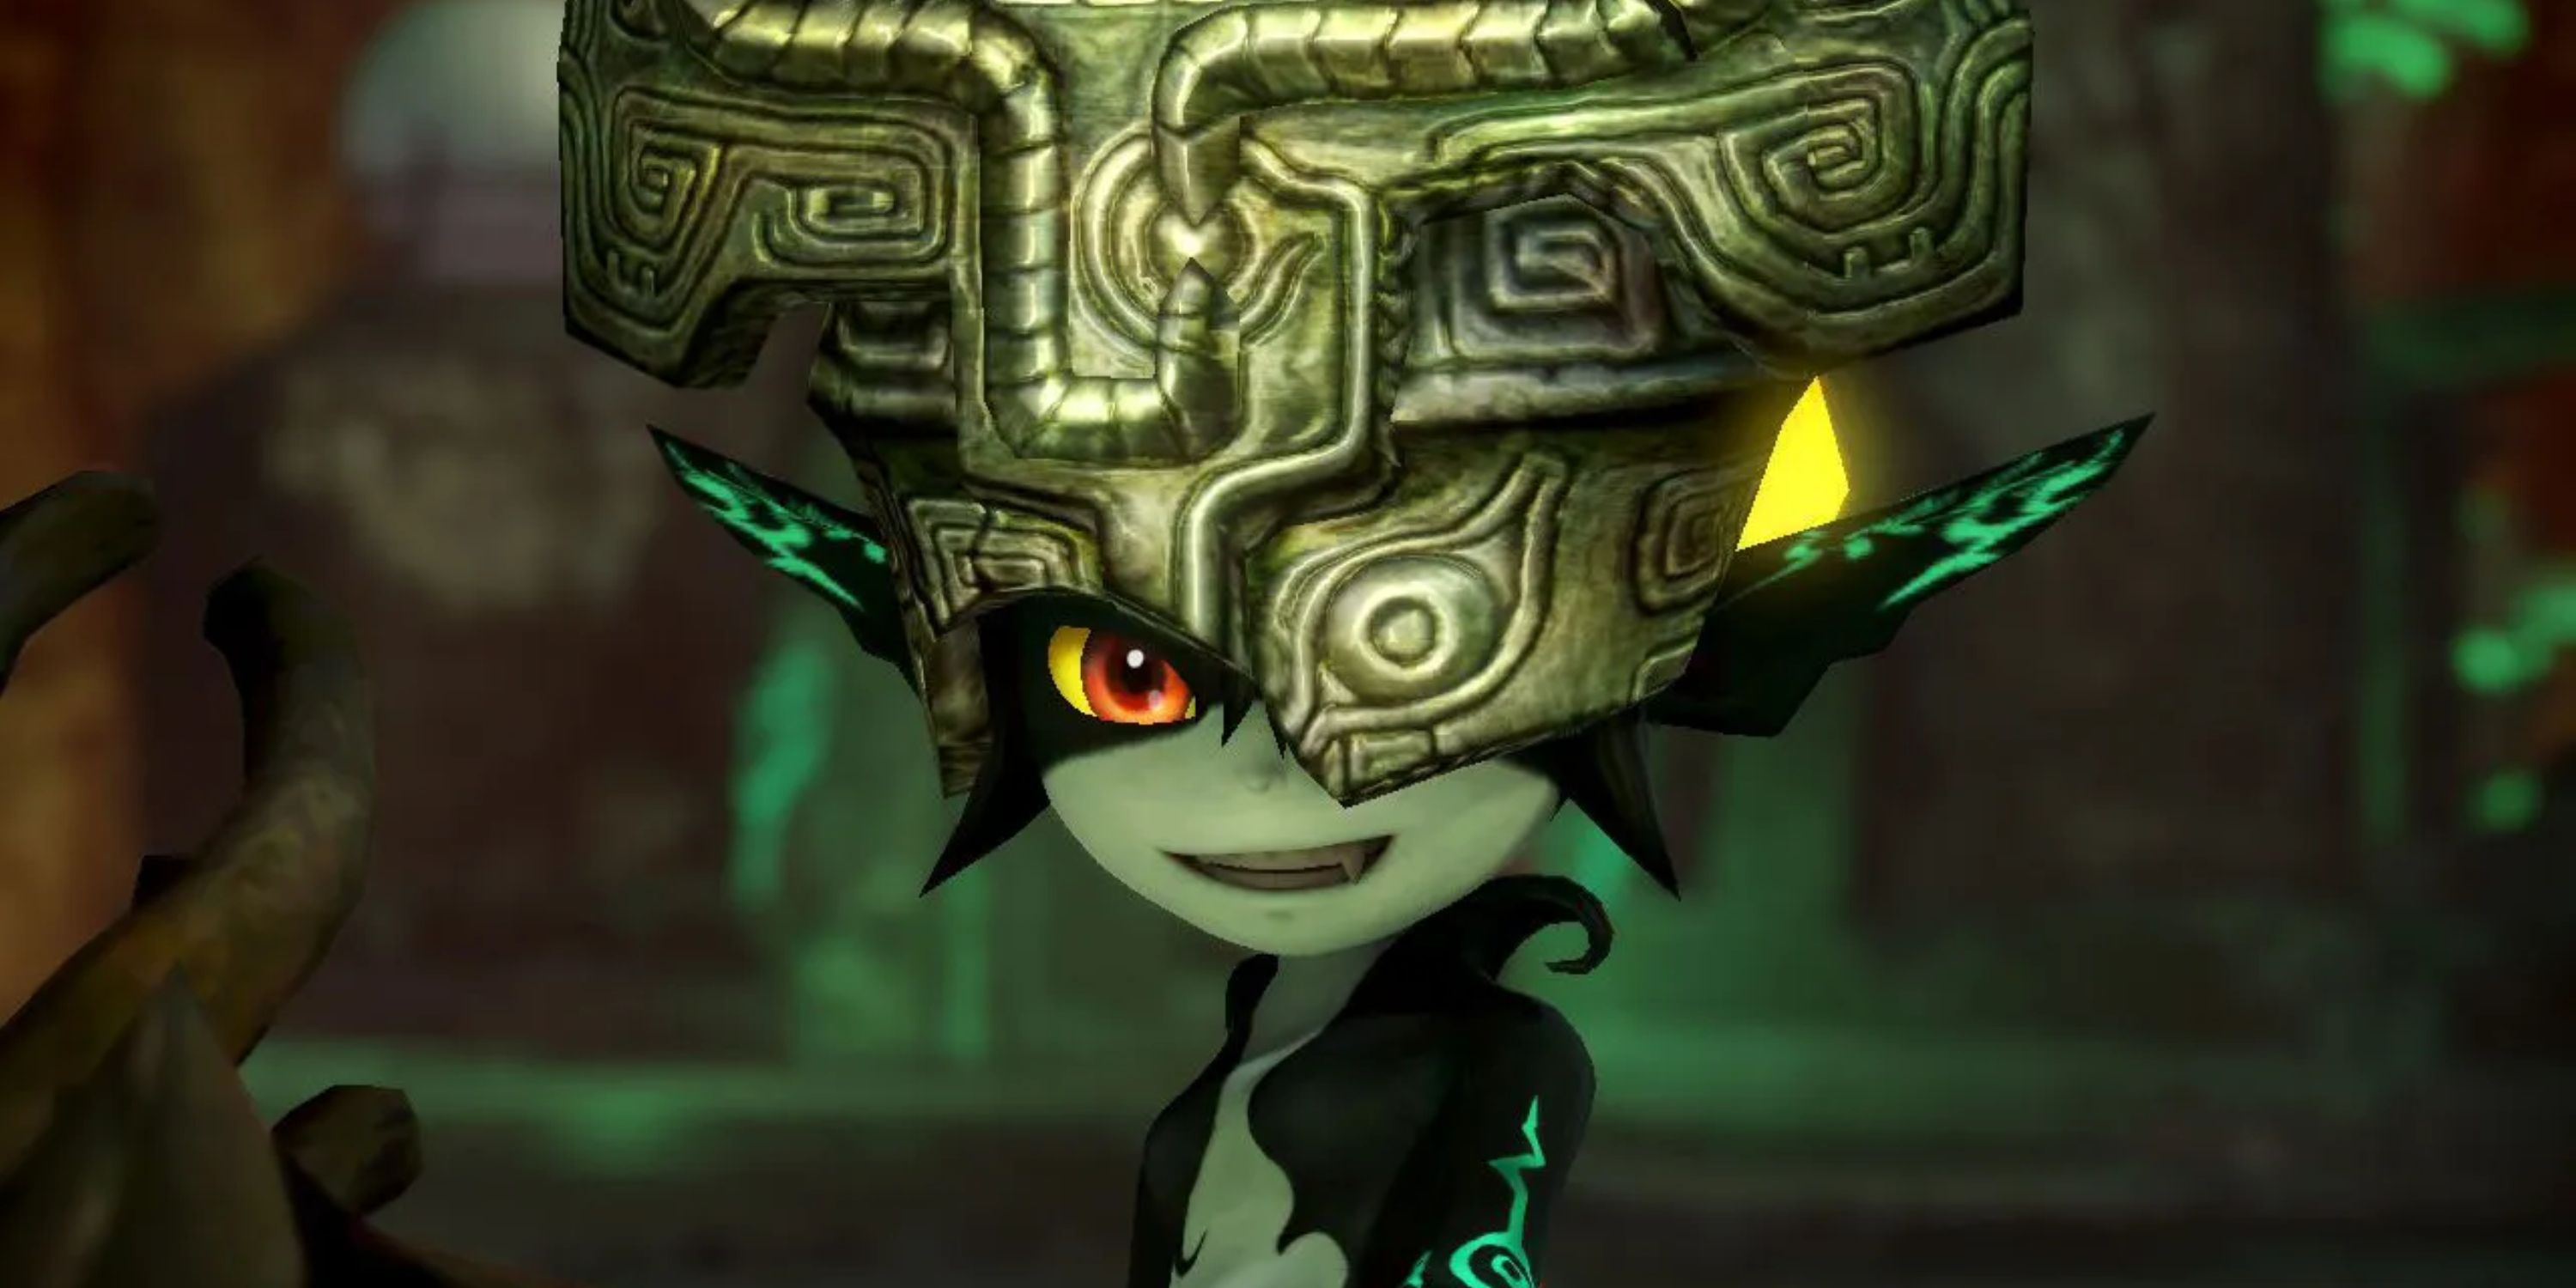 Midna in her imp form